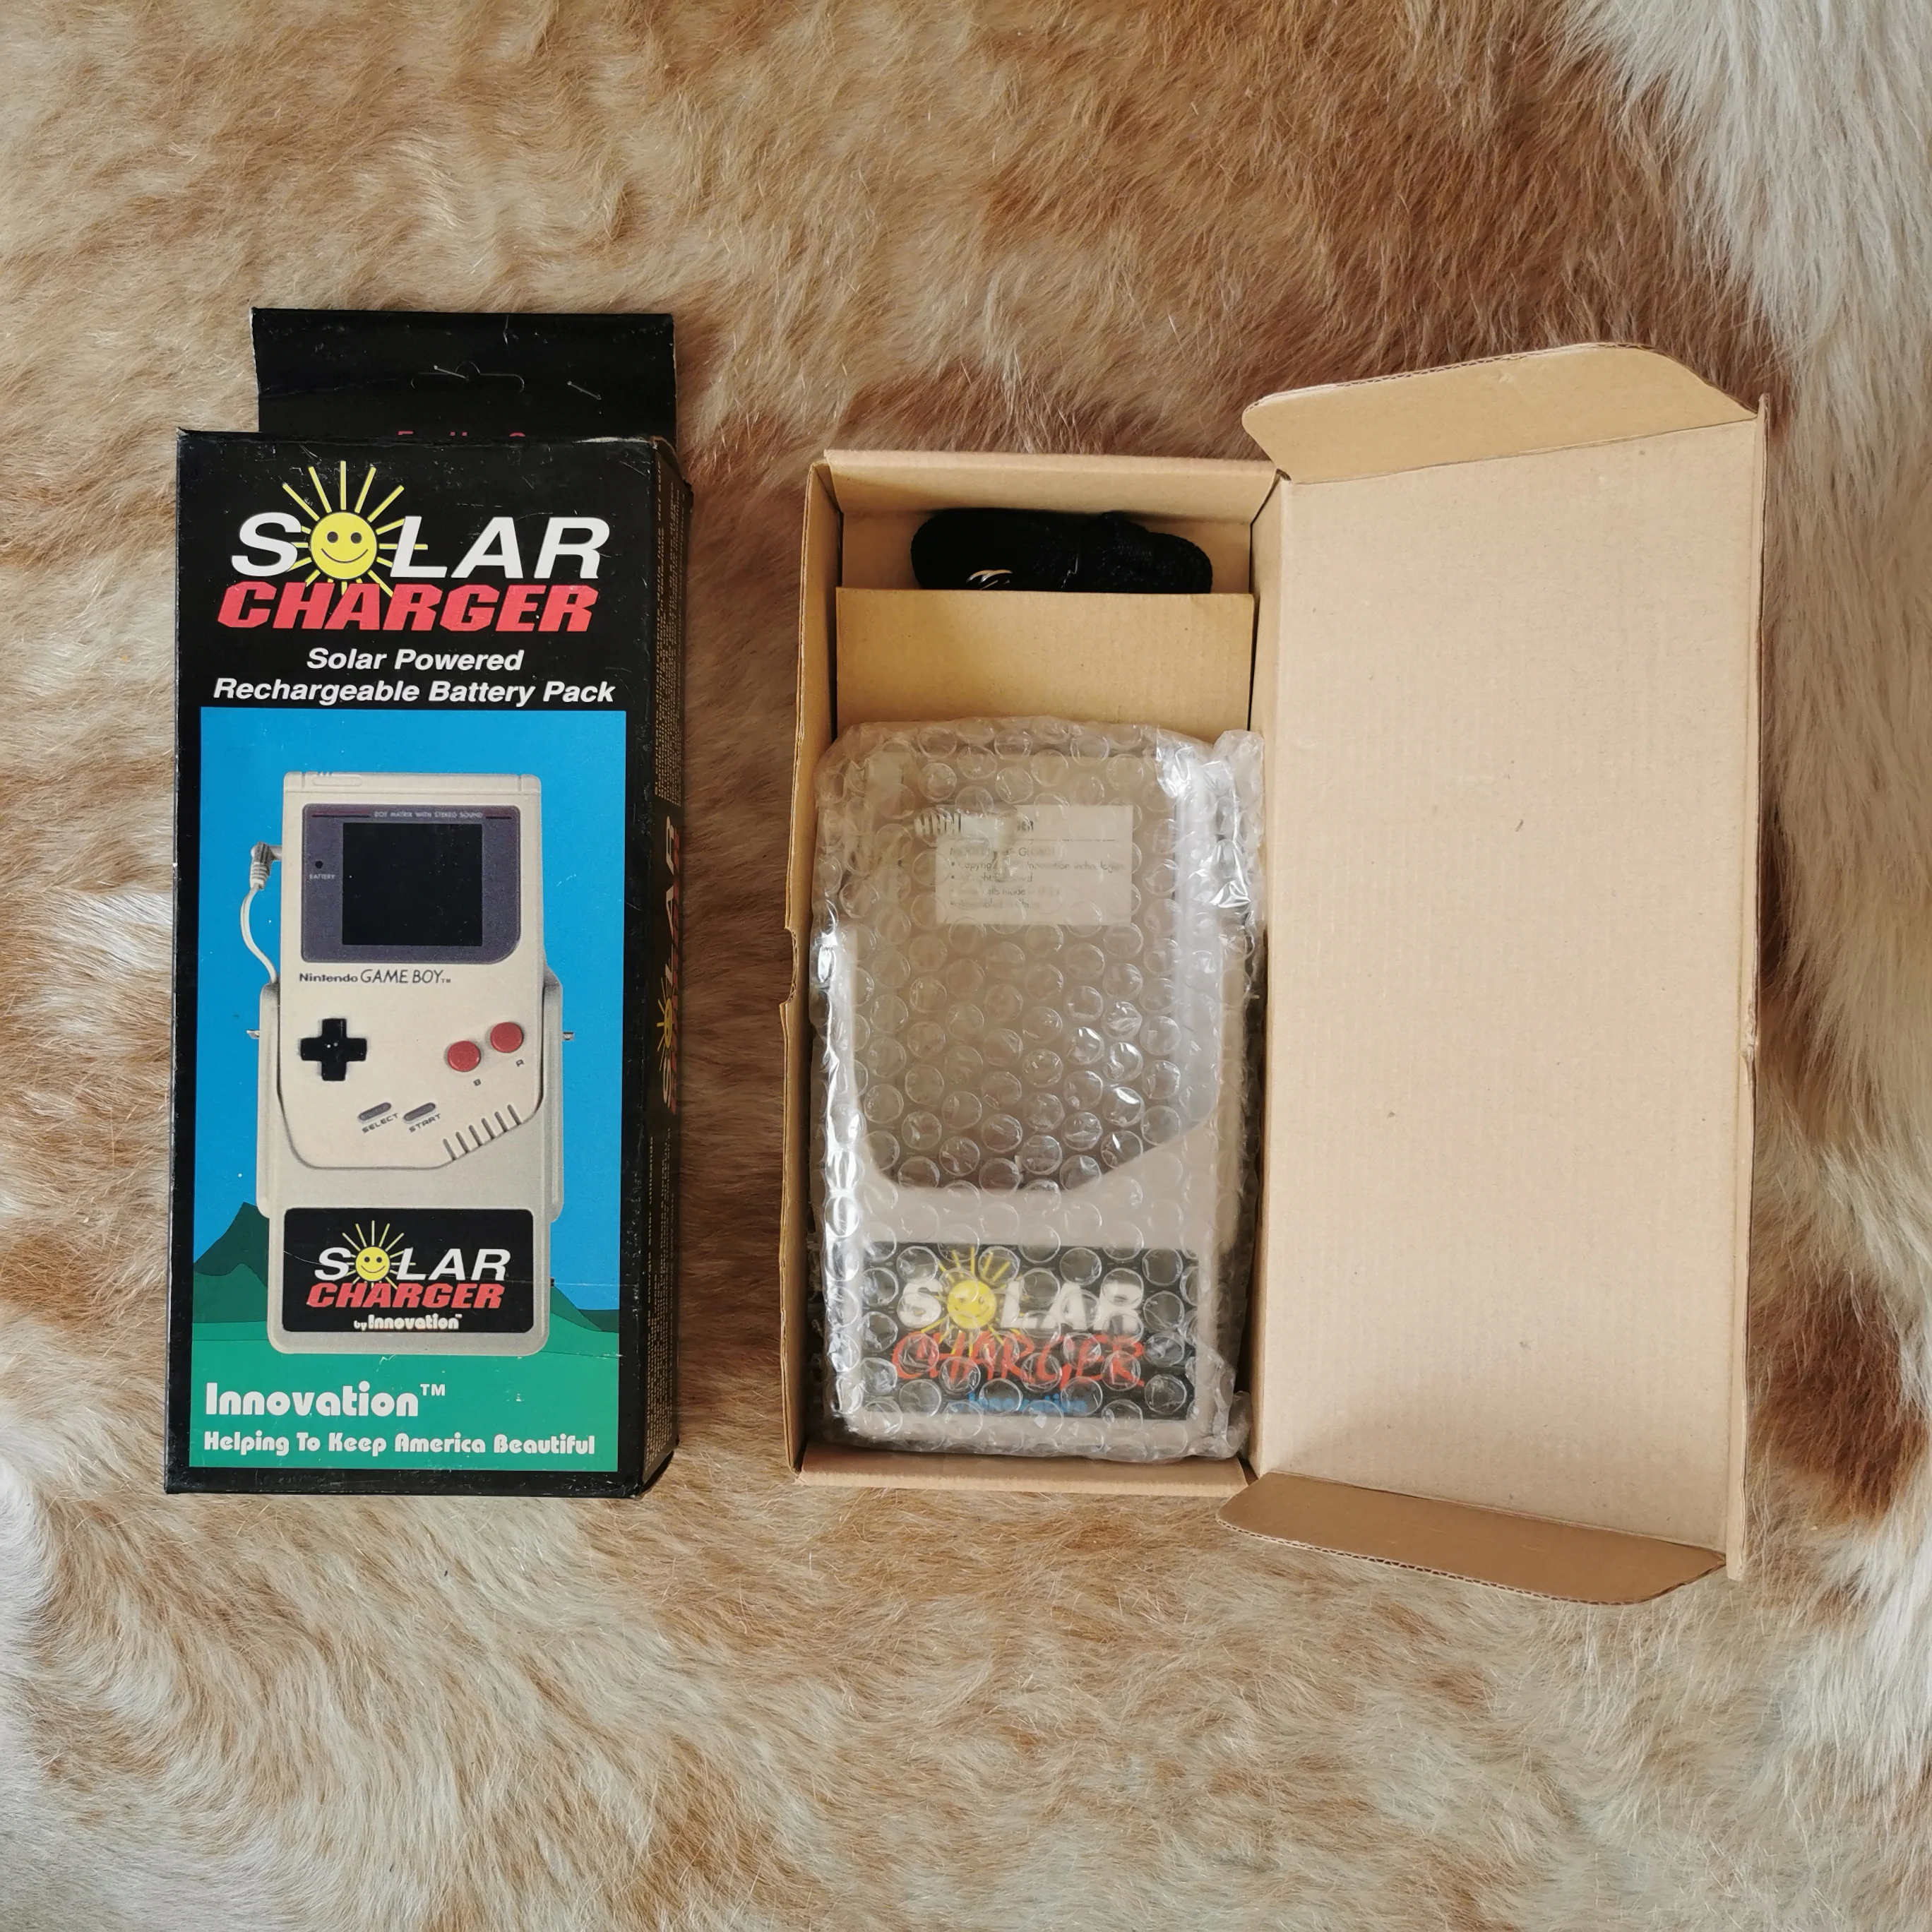  Game Boy Solar Charger